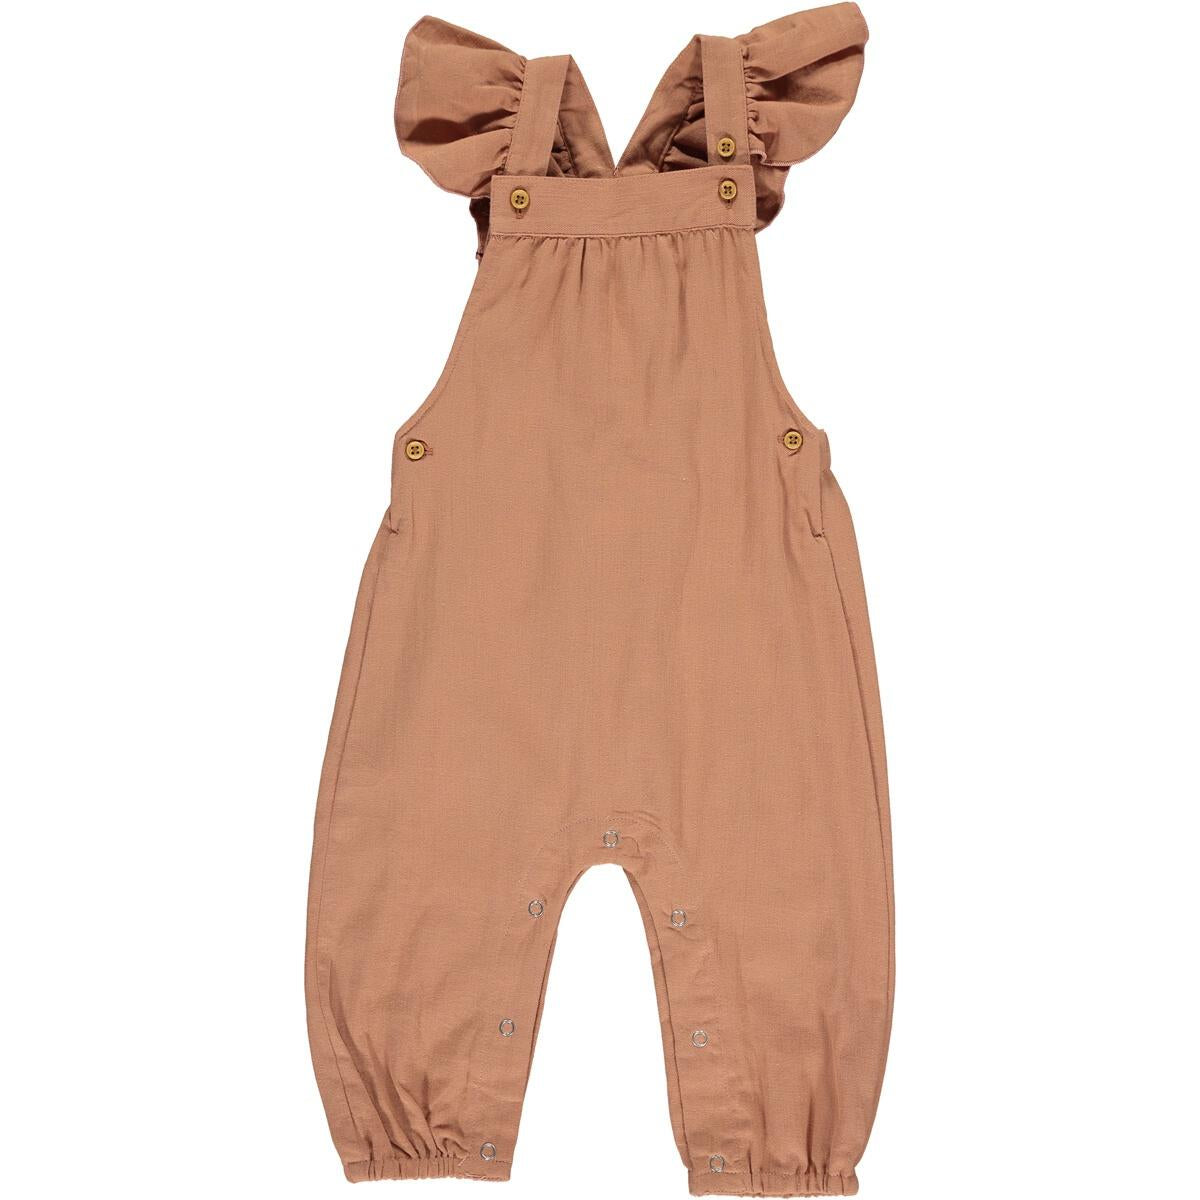 Eloise Ruffle Overall in Rose